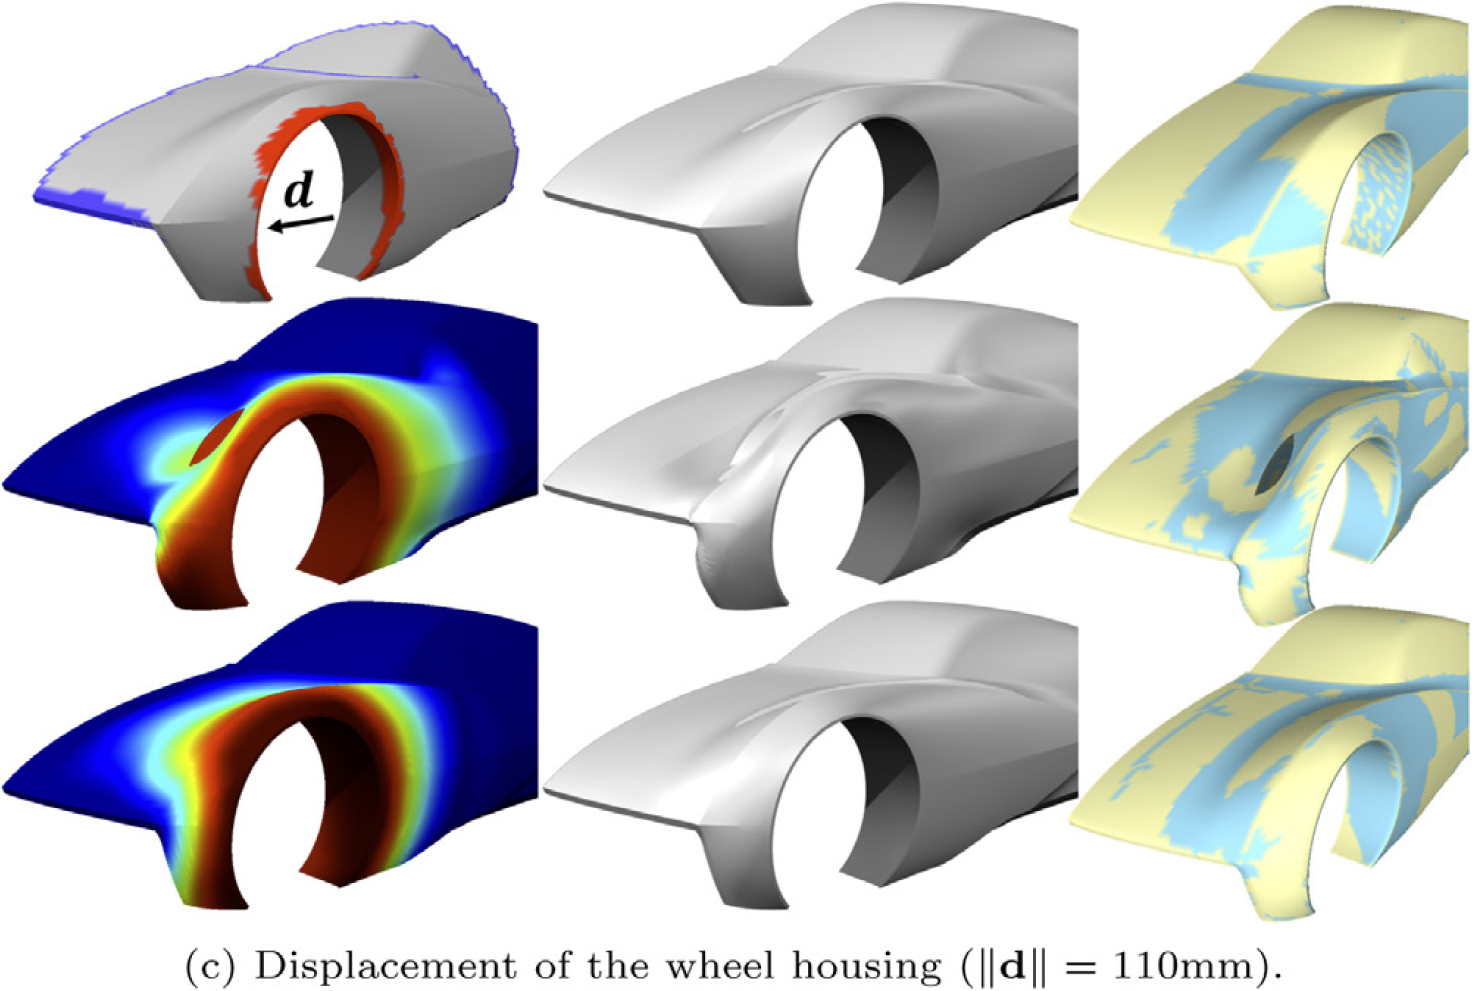 The shape preserving property of our method is illustrated with the displacement of the wheel housing. The user simply paints the deformation "handle" in red and indicated a push/pull direction dd. The result of our method is shown in the bottom row together with a distance colormap (left) and a Gaussian Curvature sign map(right).